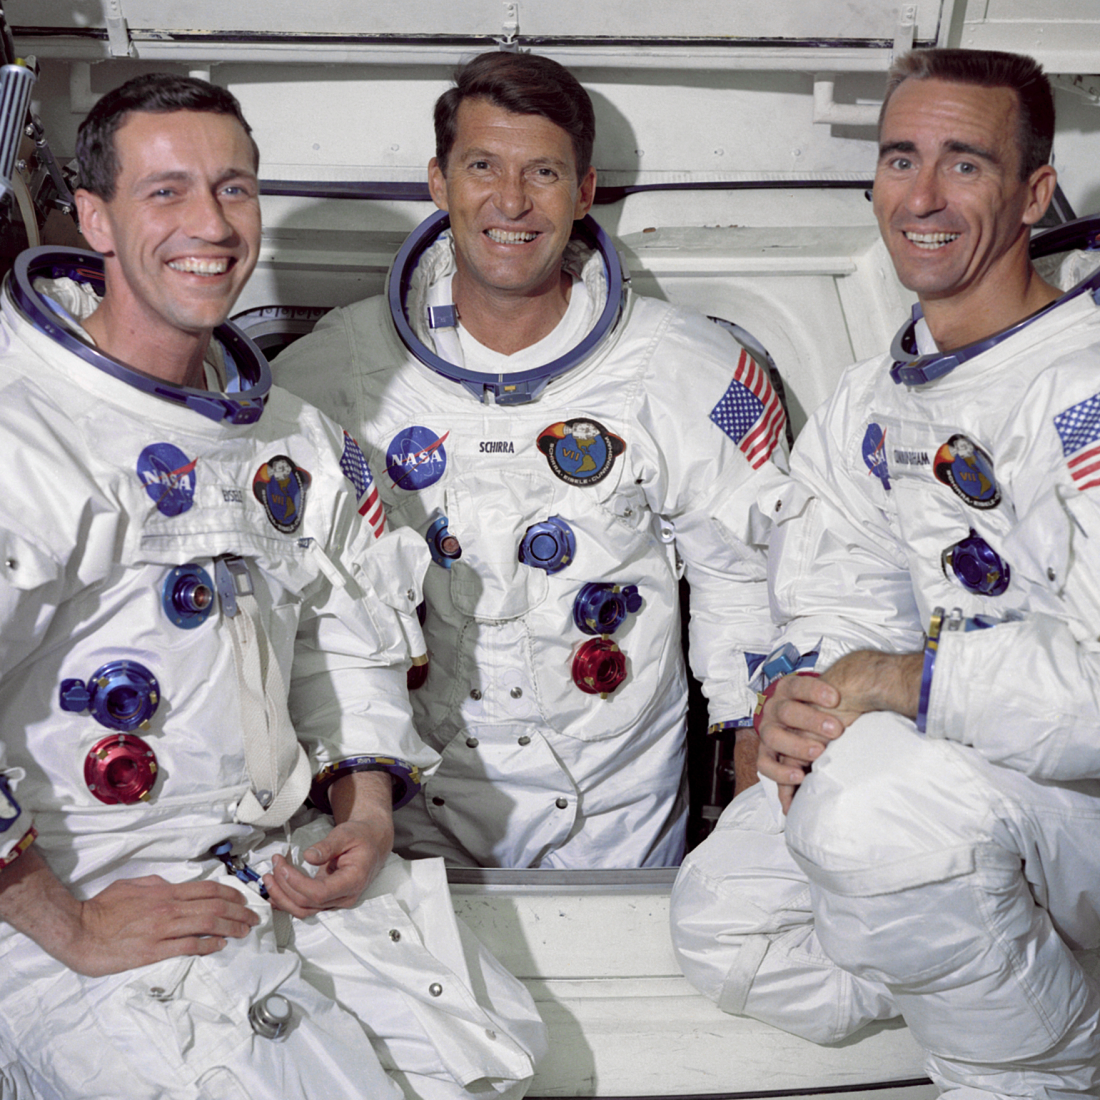 Apollo 7 Crew posing in their space suits.